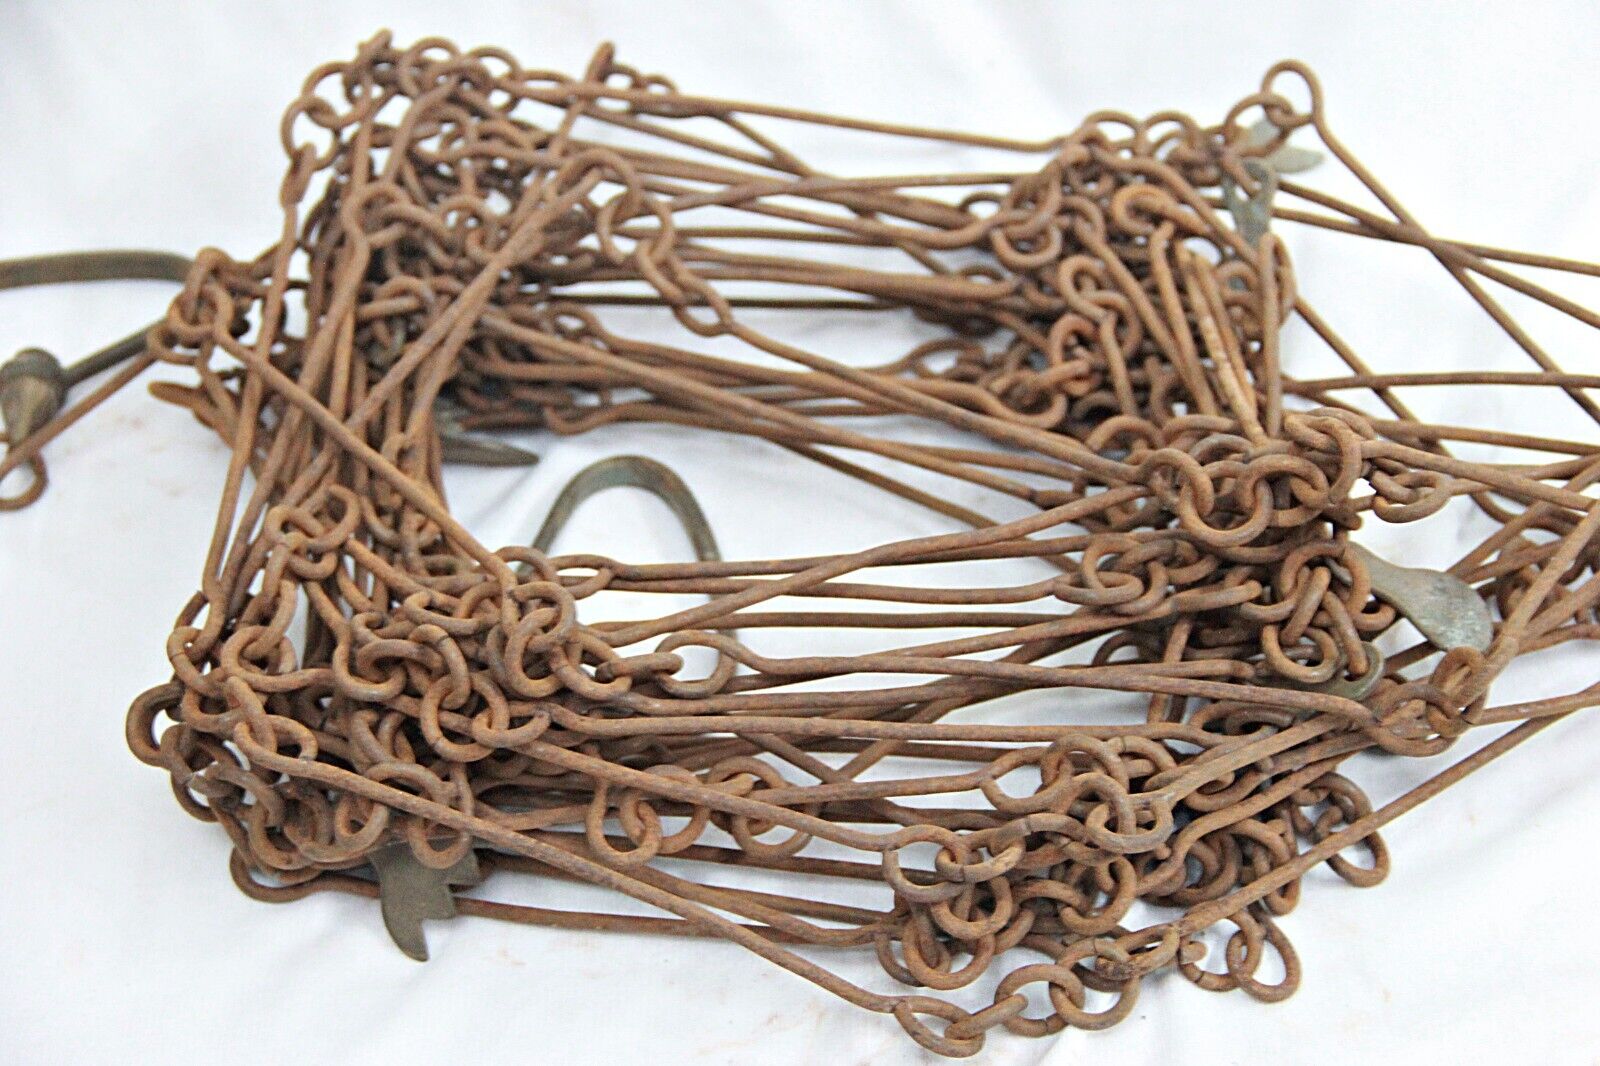 66 Feet Rare Vintage Iron Land Survey Measuring Chain with Brass Handles & Tags